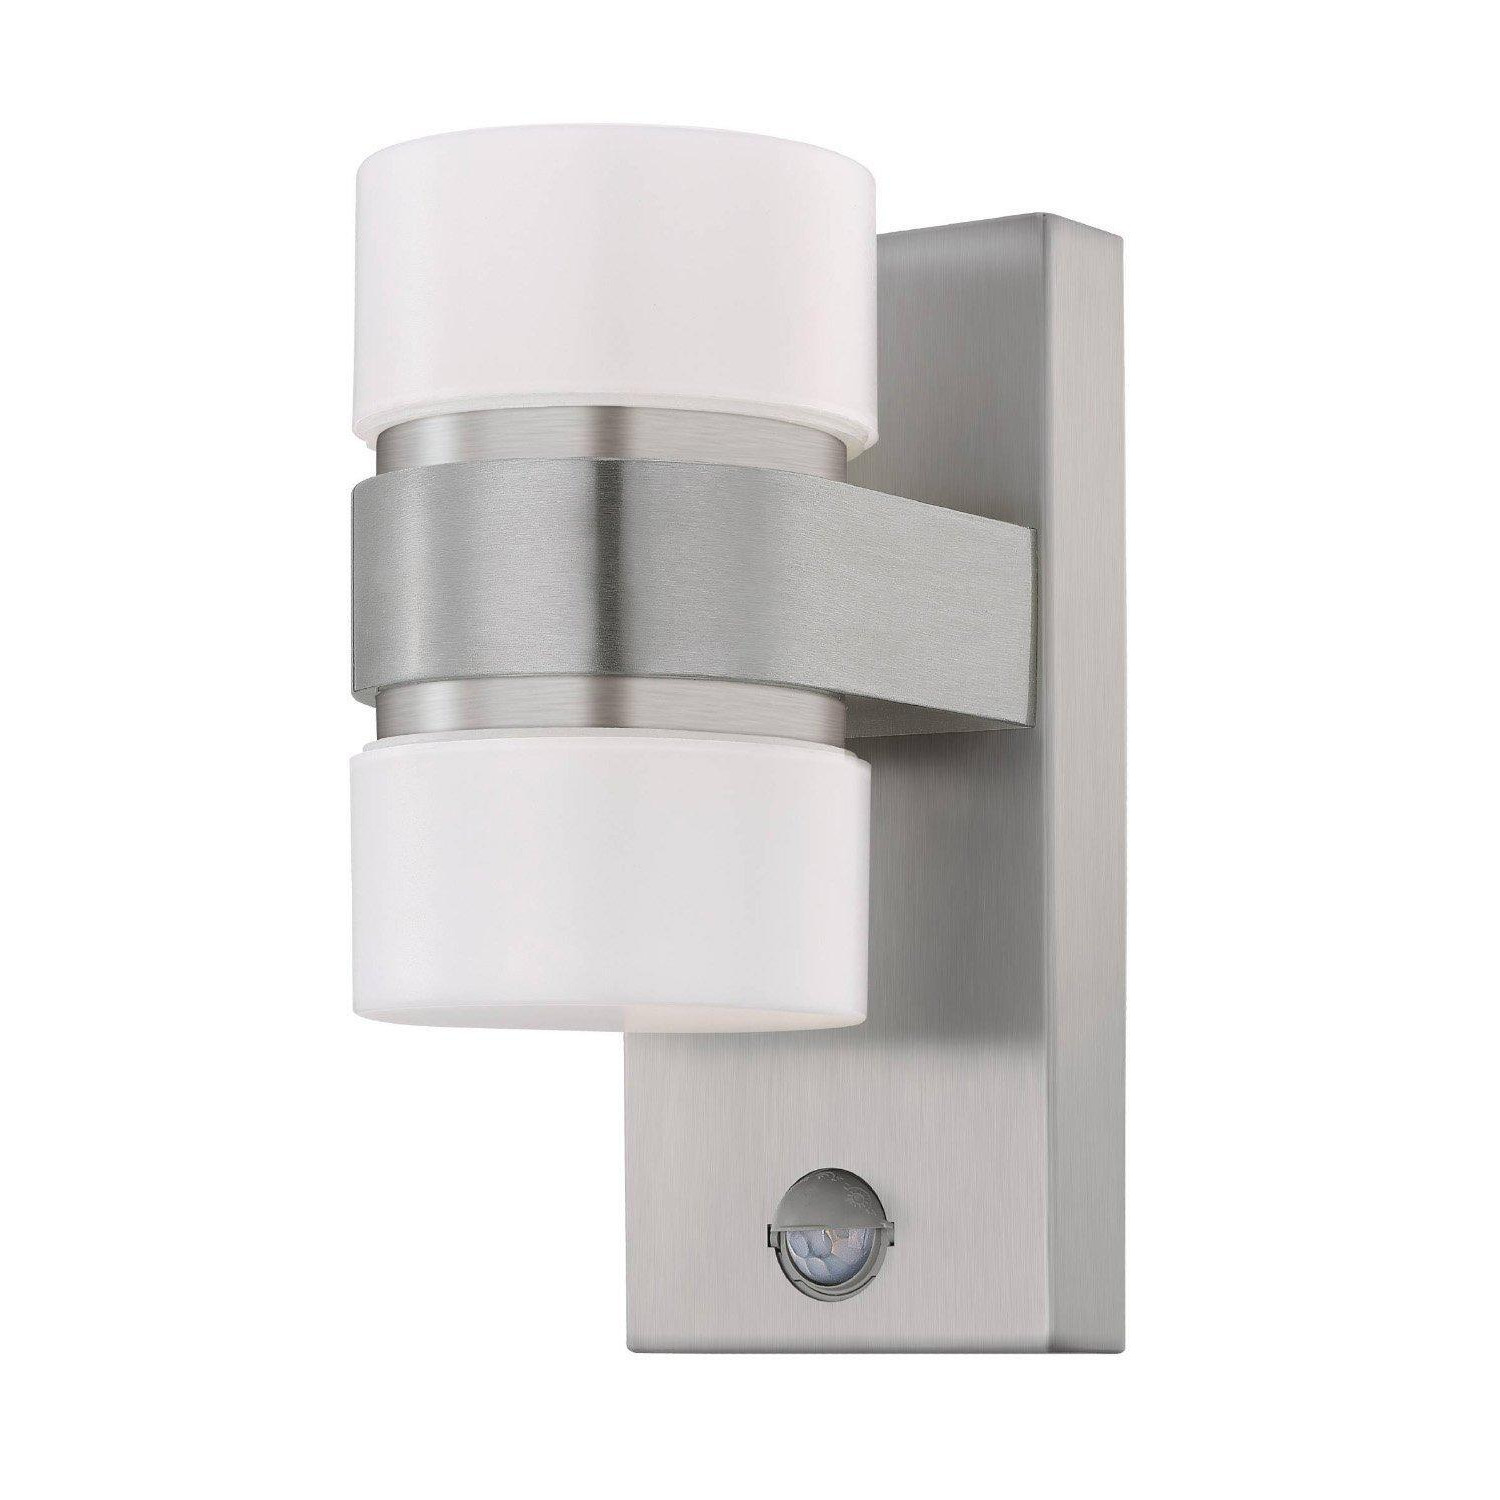 Atollari Stainless Steel Cylindrical IP44 Integrated LED Outdoor Wall Light - image 1